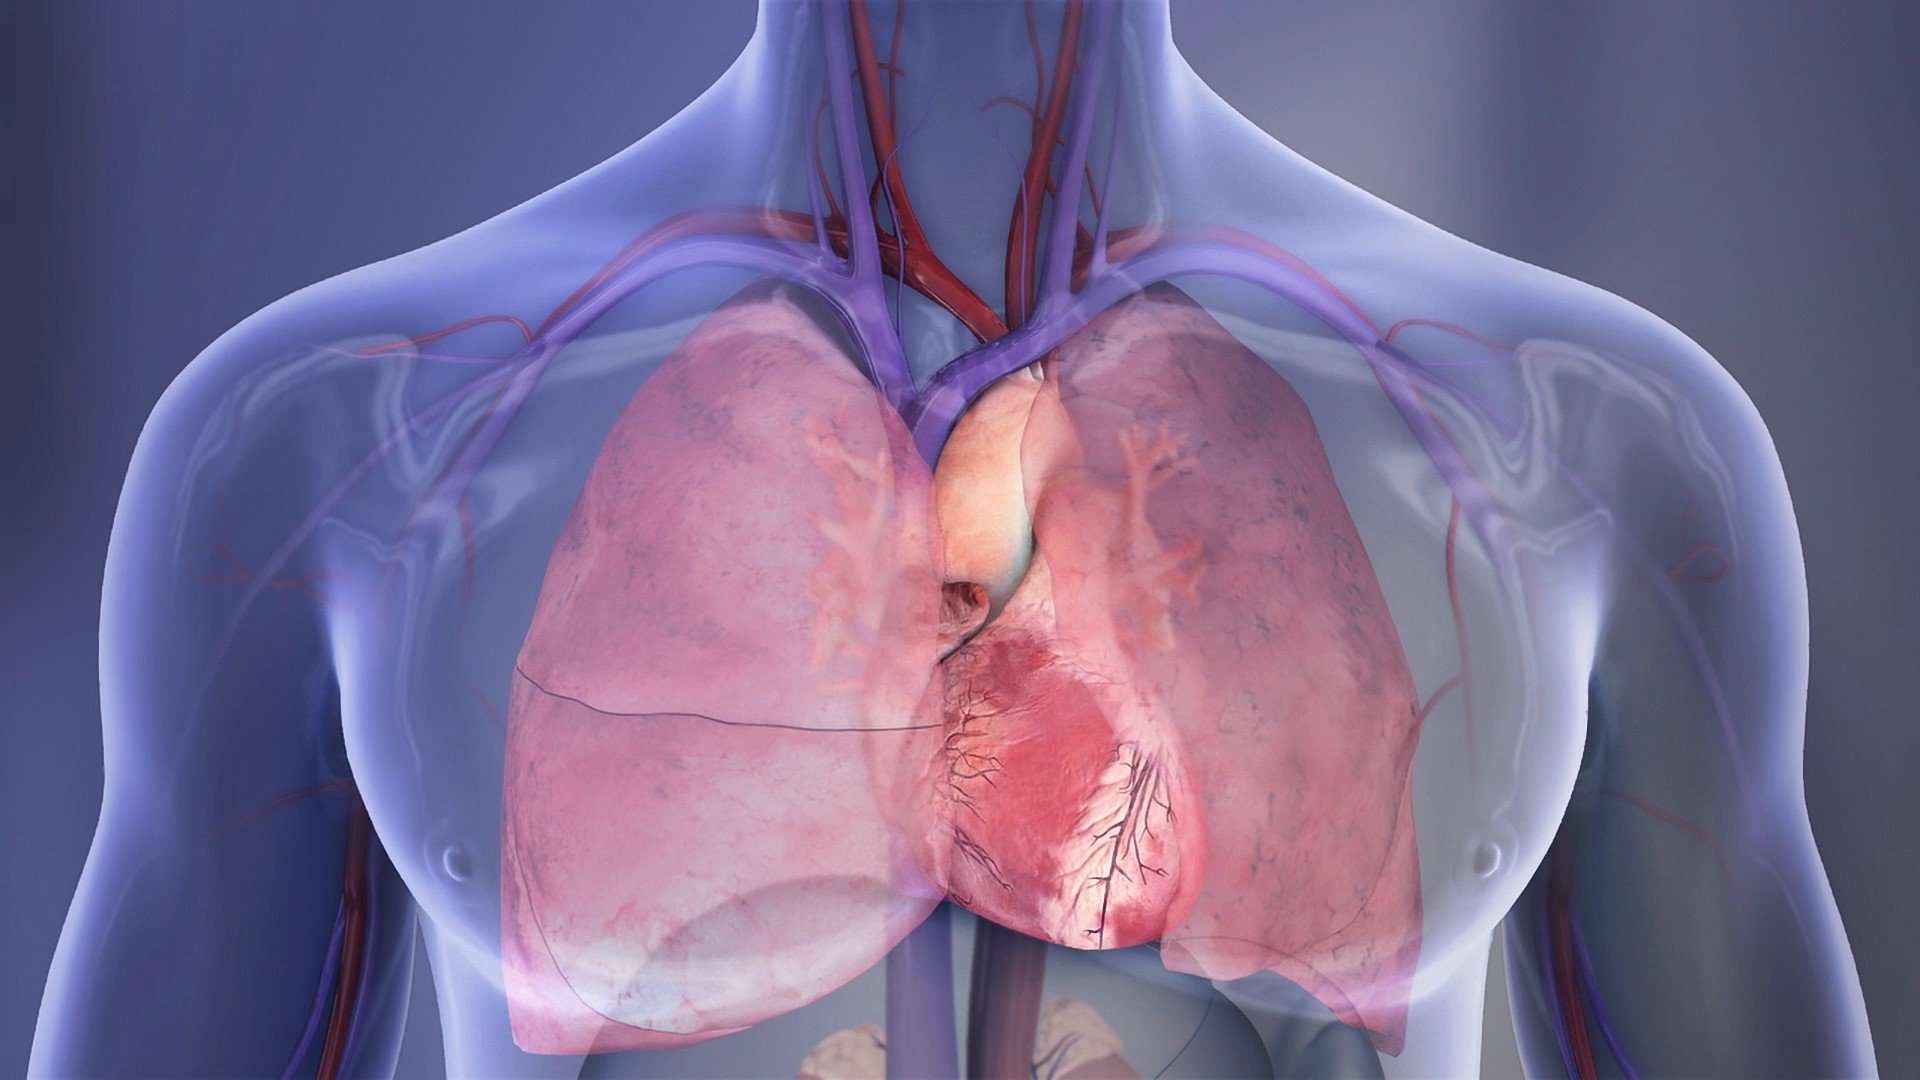 Heart+and+lungs+illustration